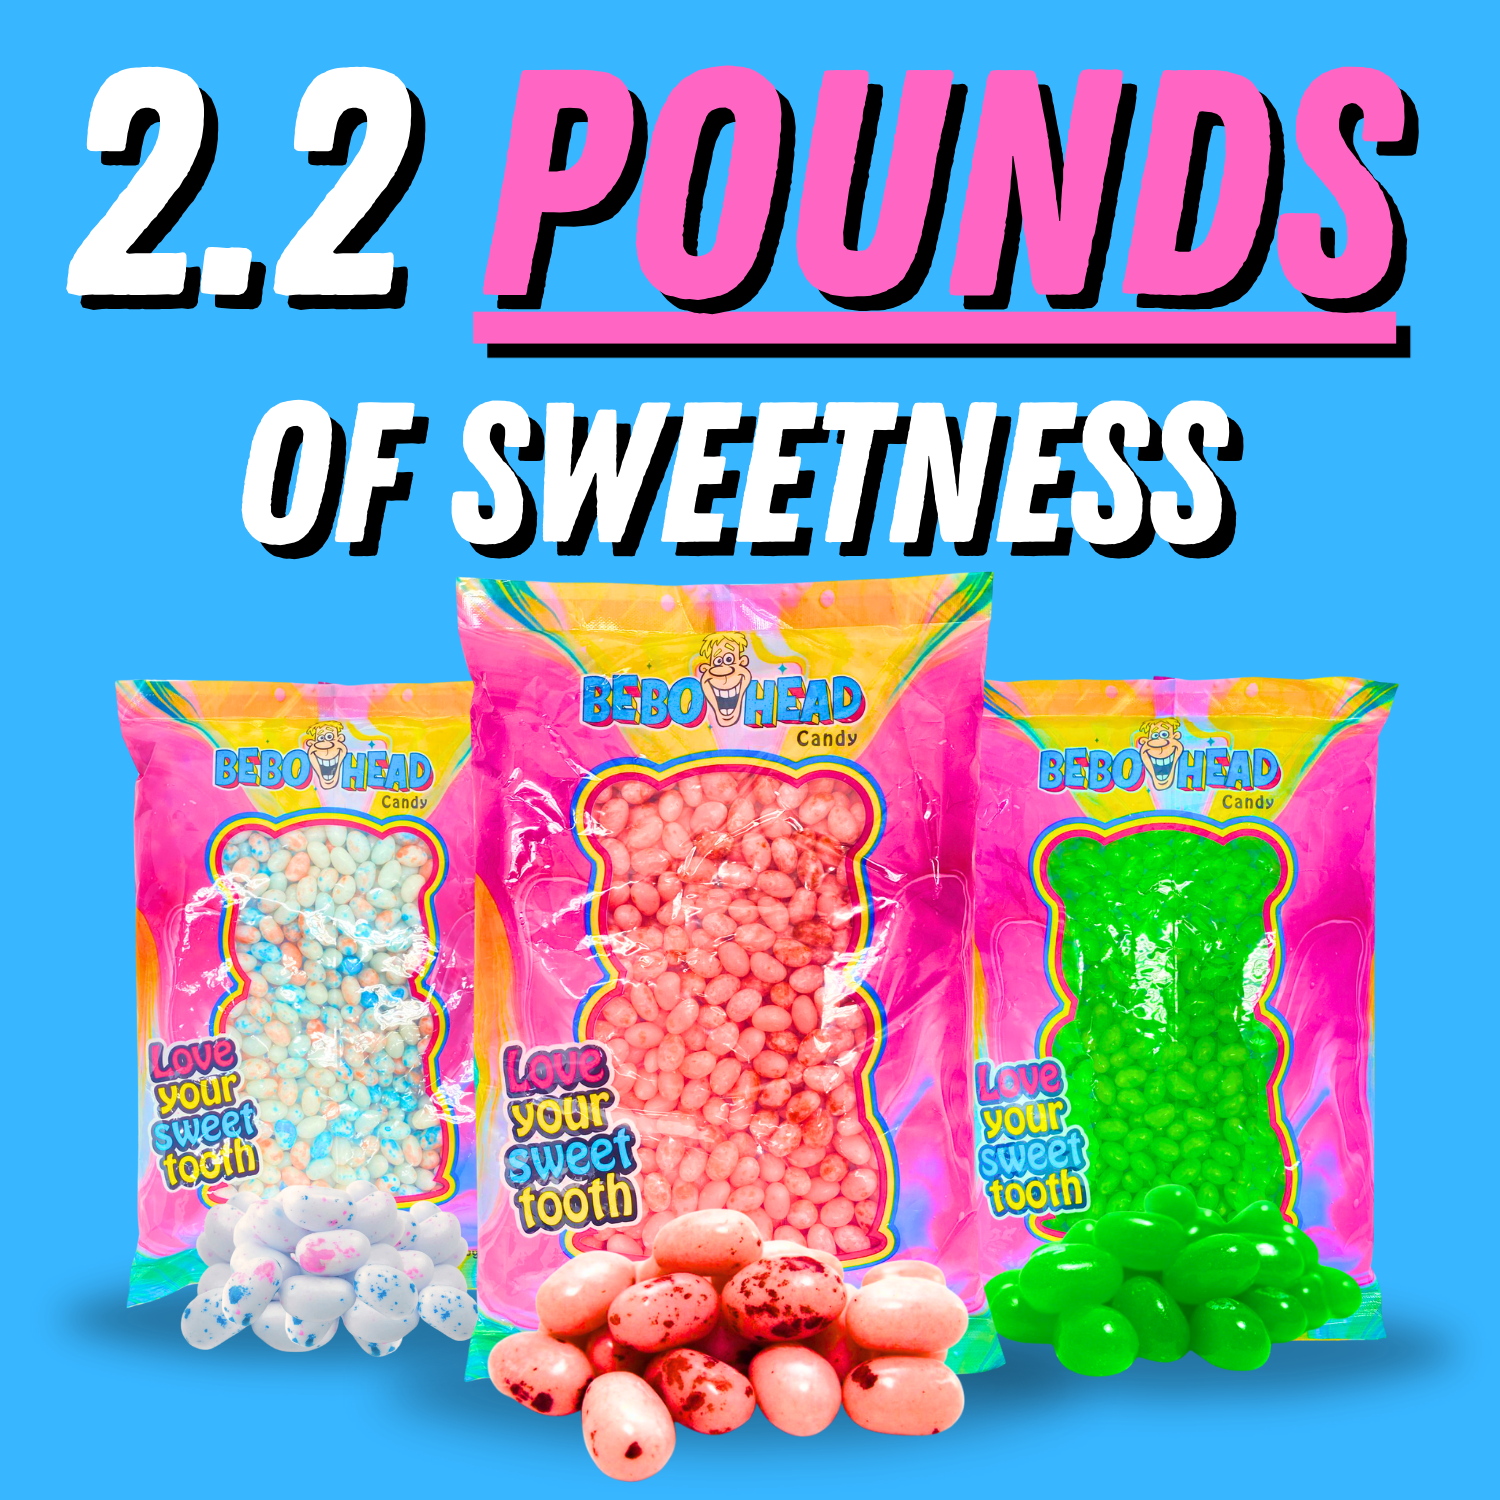 Cherry Jelly Beans - 2.2 Pounds